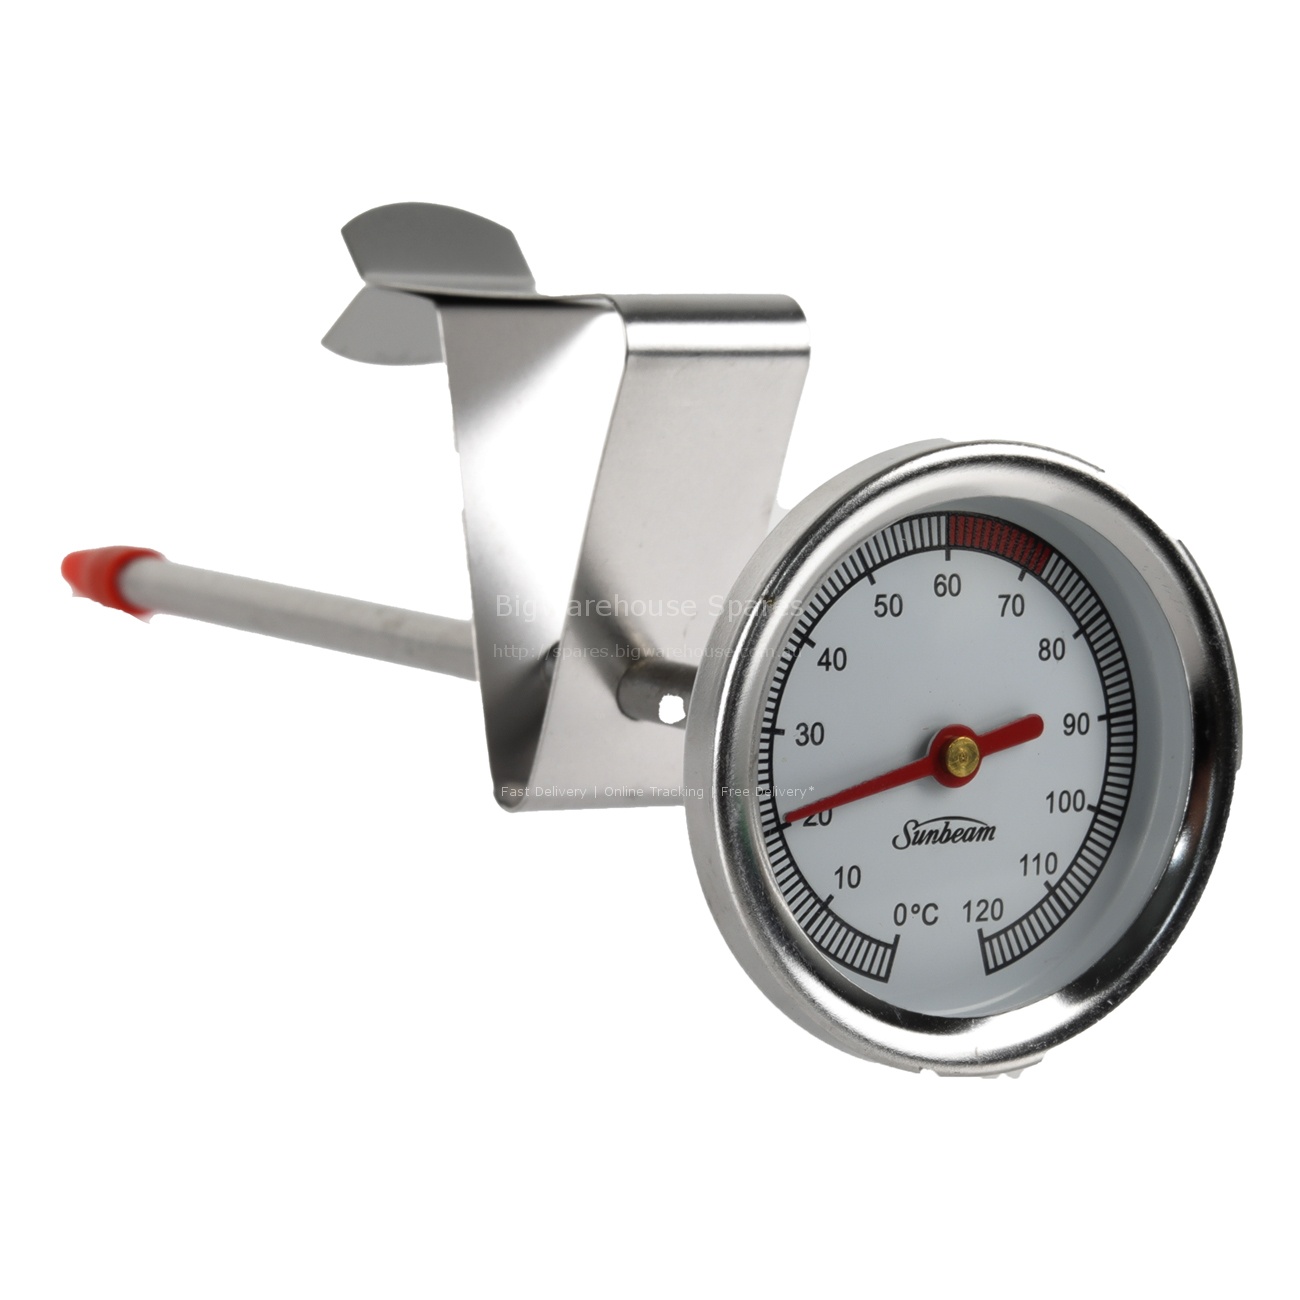 EMM5400 THERMOMETER